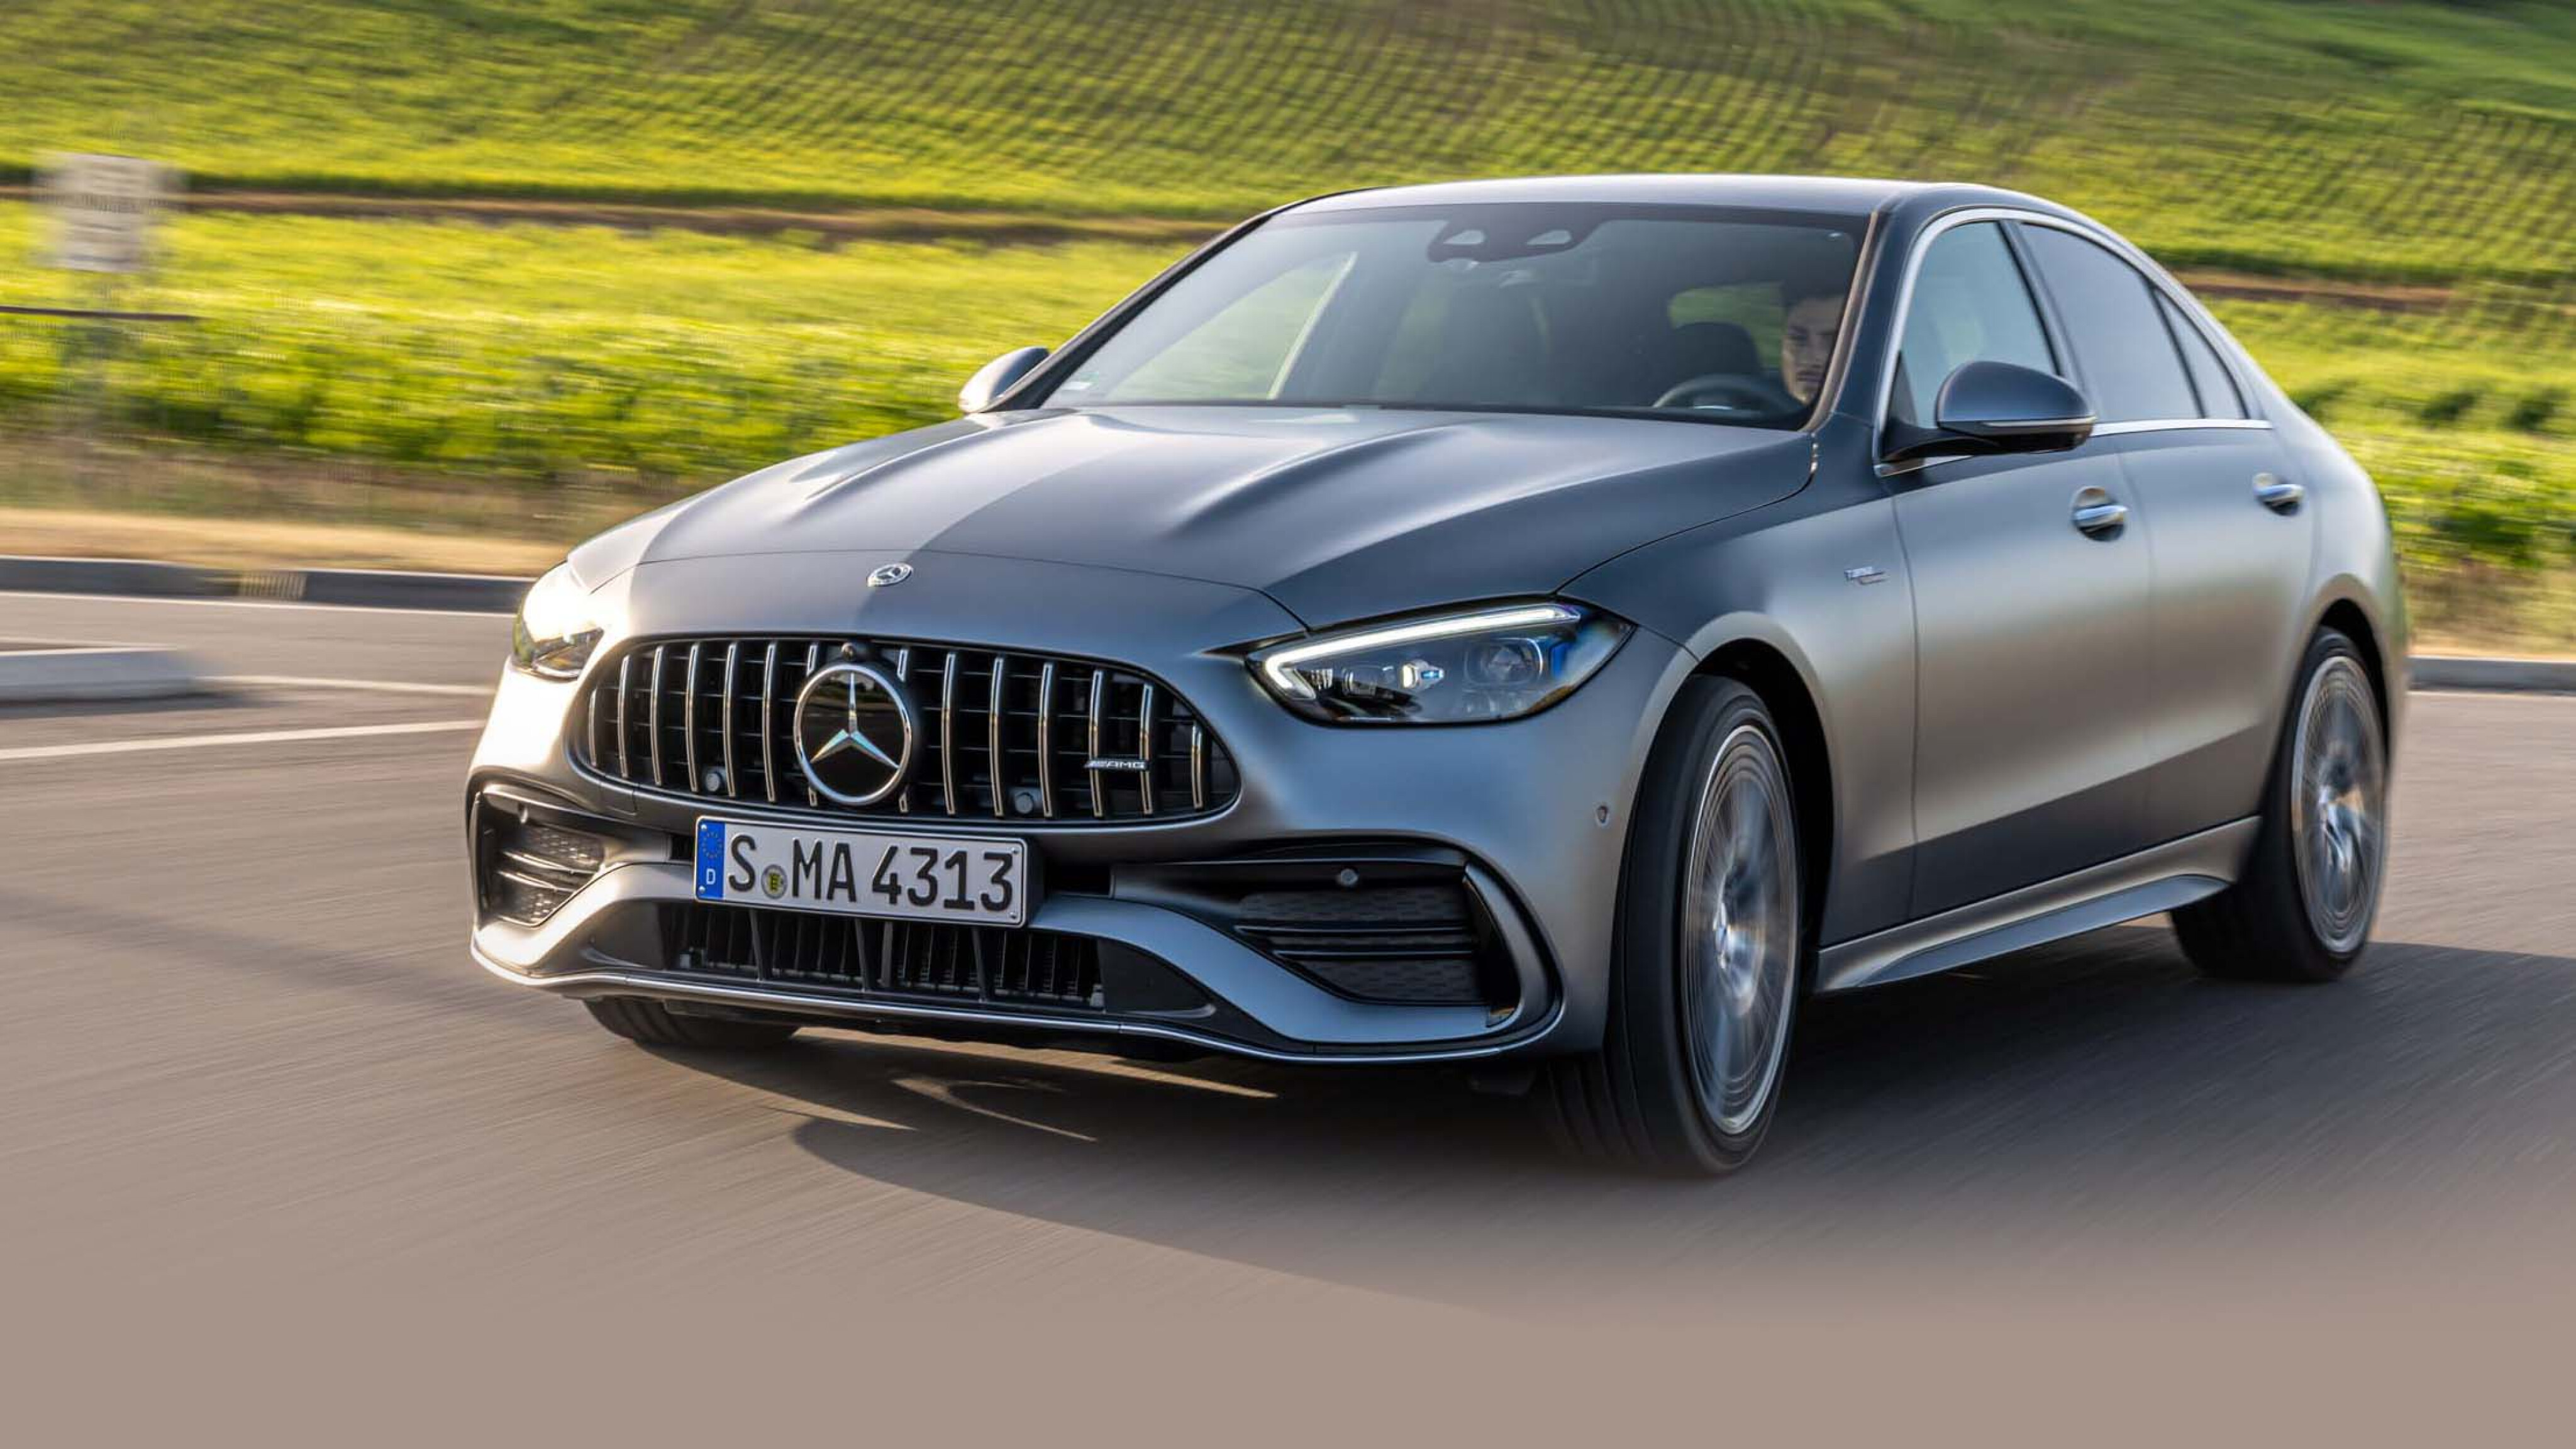 2023 Mercedes-AMG C43 review: 4-cylinder turbo barges in!